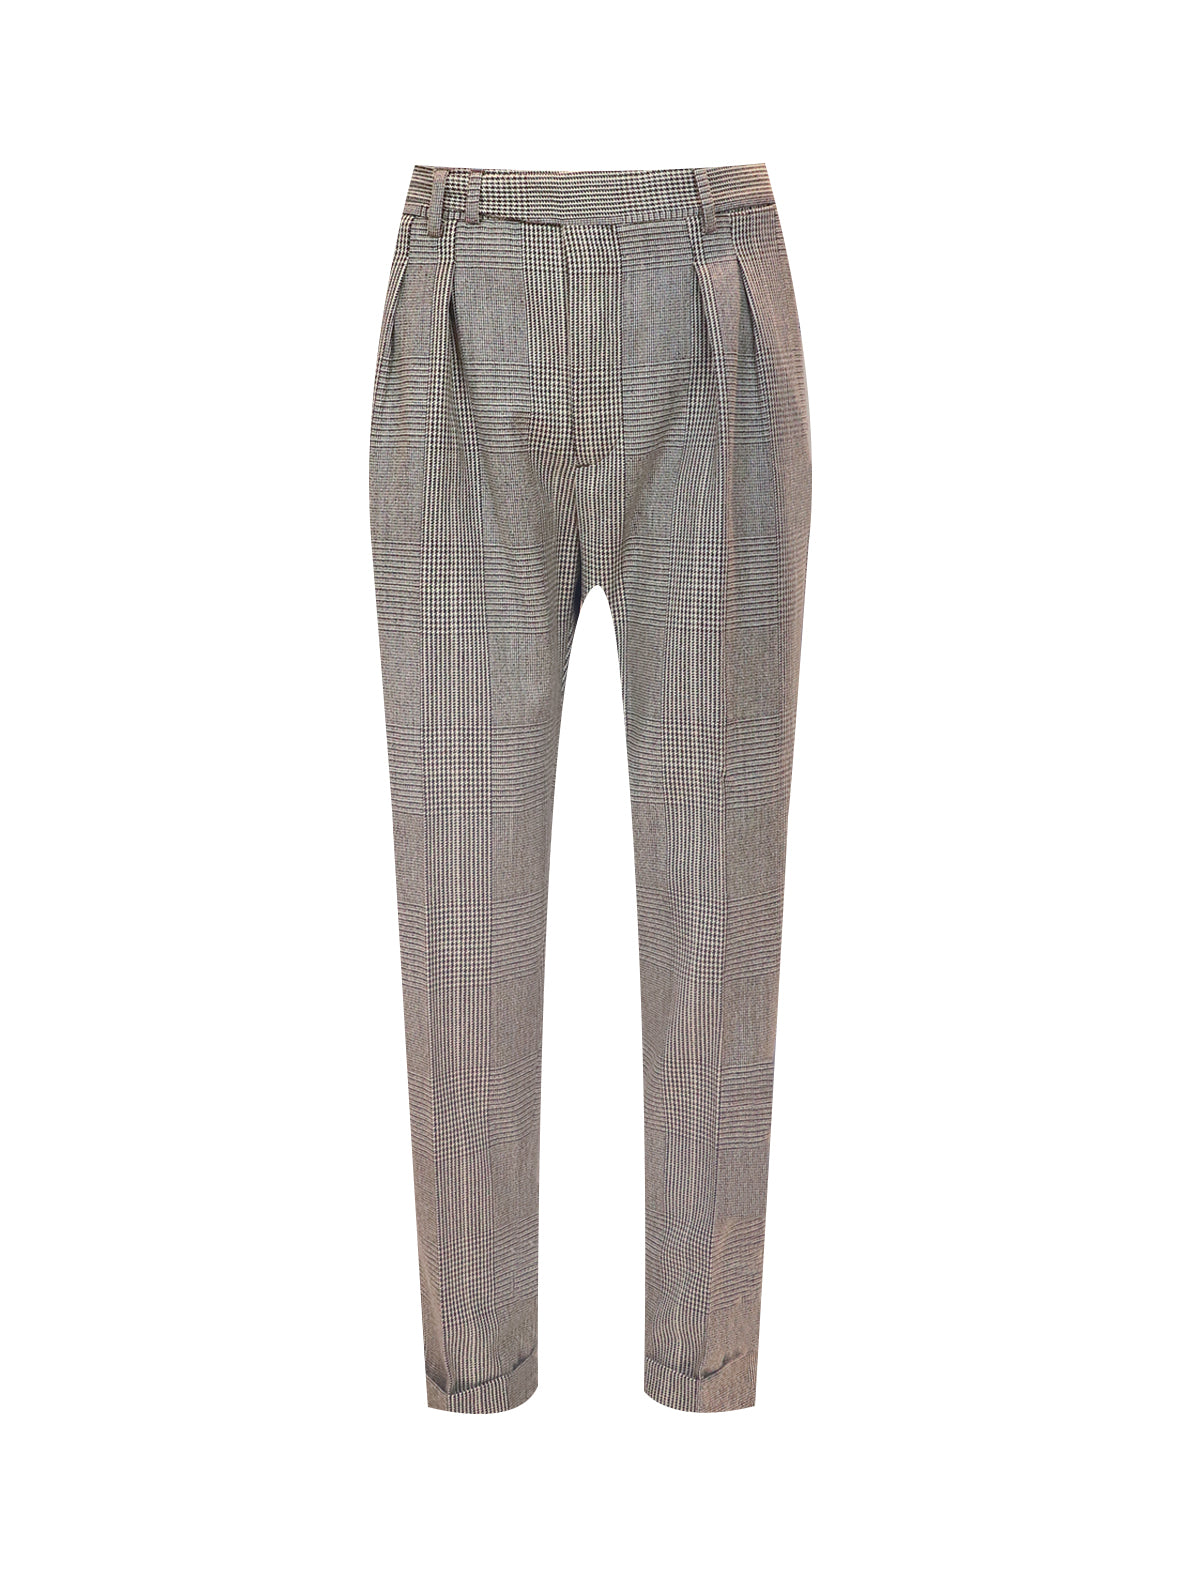 PT TORINO The Reporter Prince Of Wales Trouser in Grey/Brown